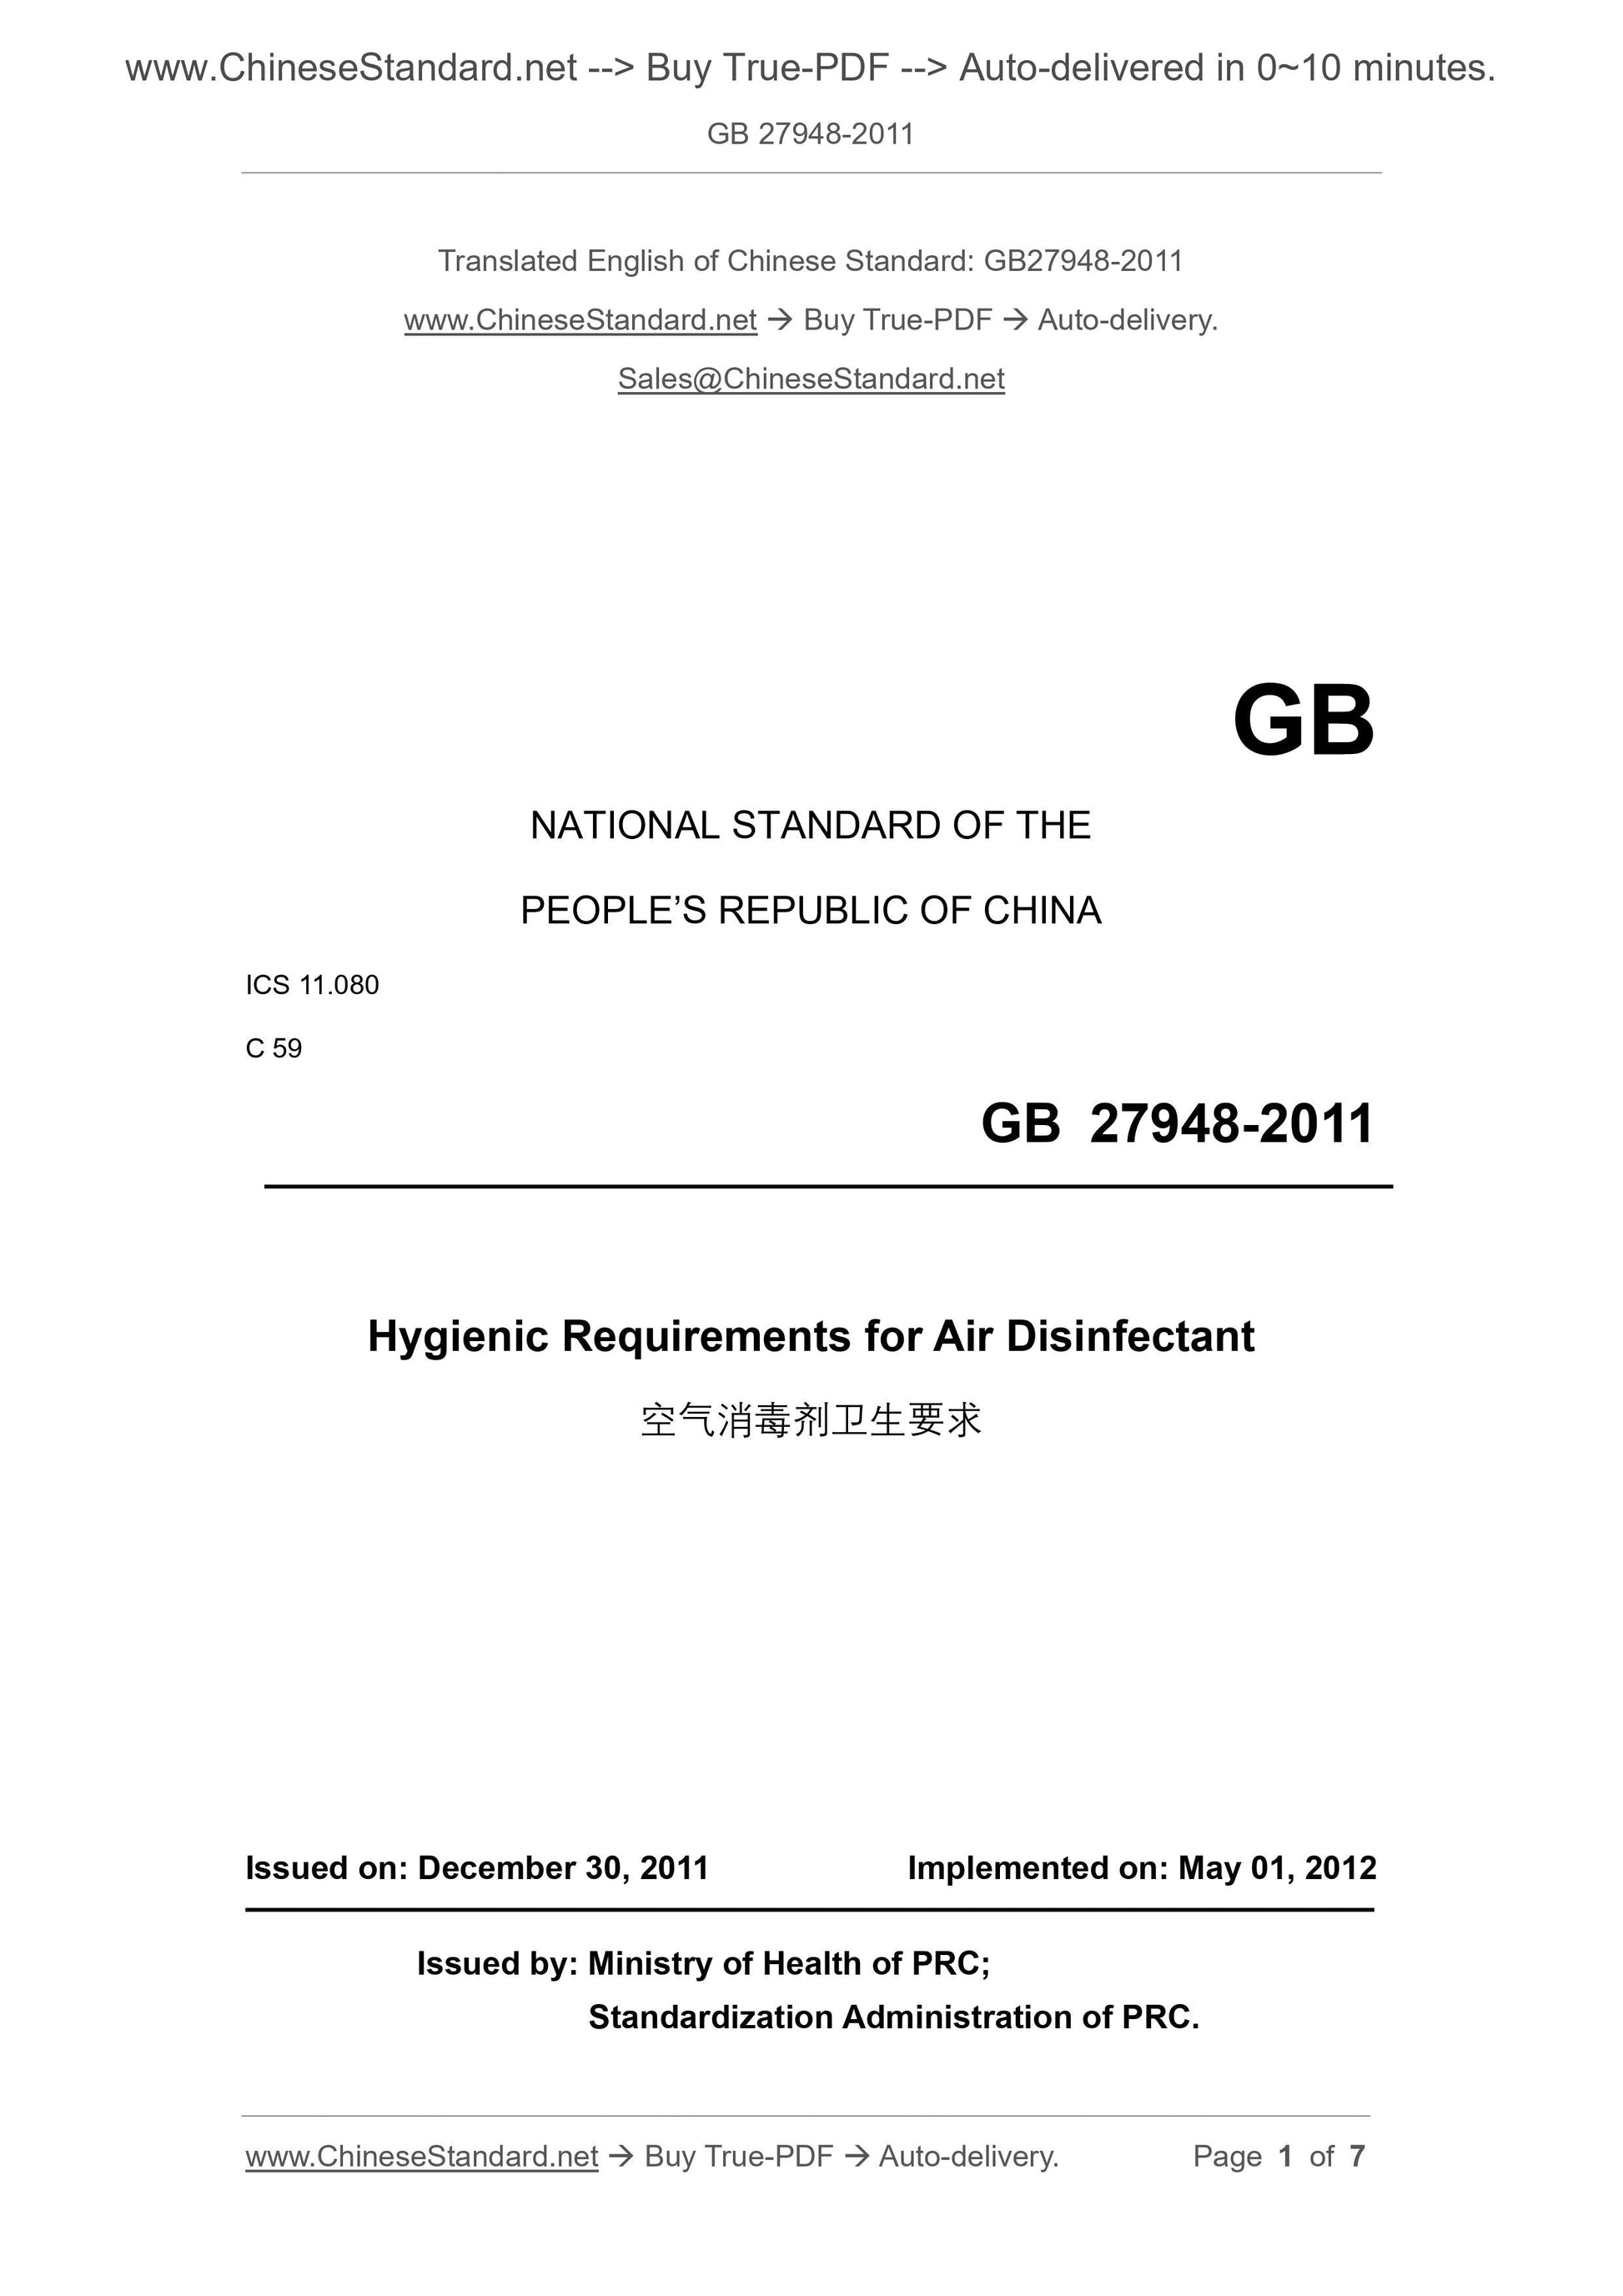 GB 27948-2011 Page 1